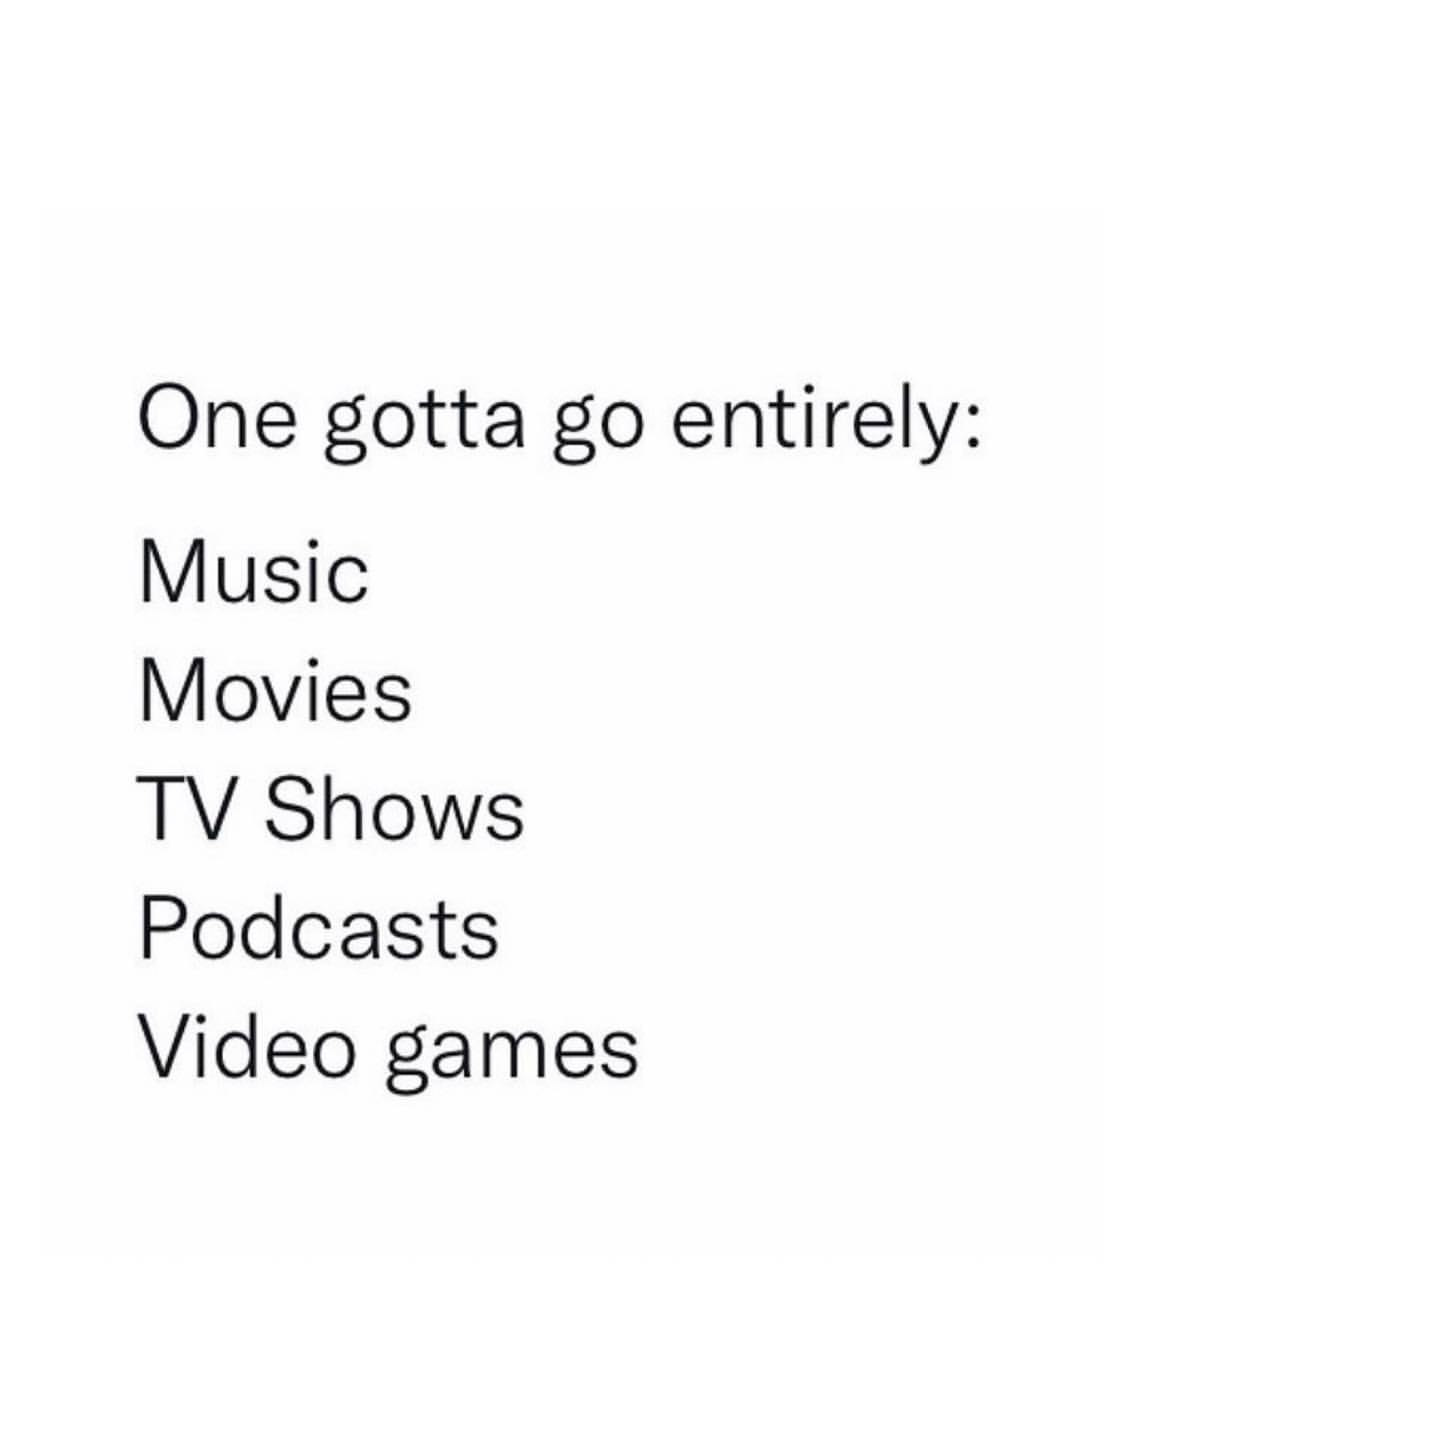 One gotta go entirely: Music. Movies. TV Shows. Podcasts. Video games.